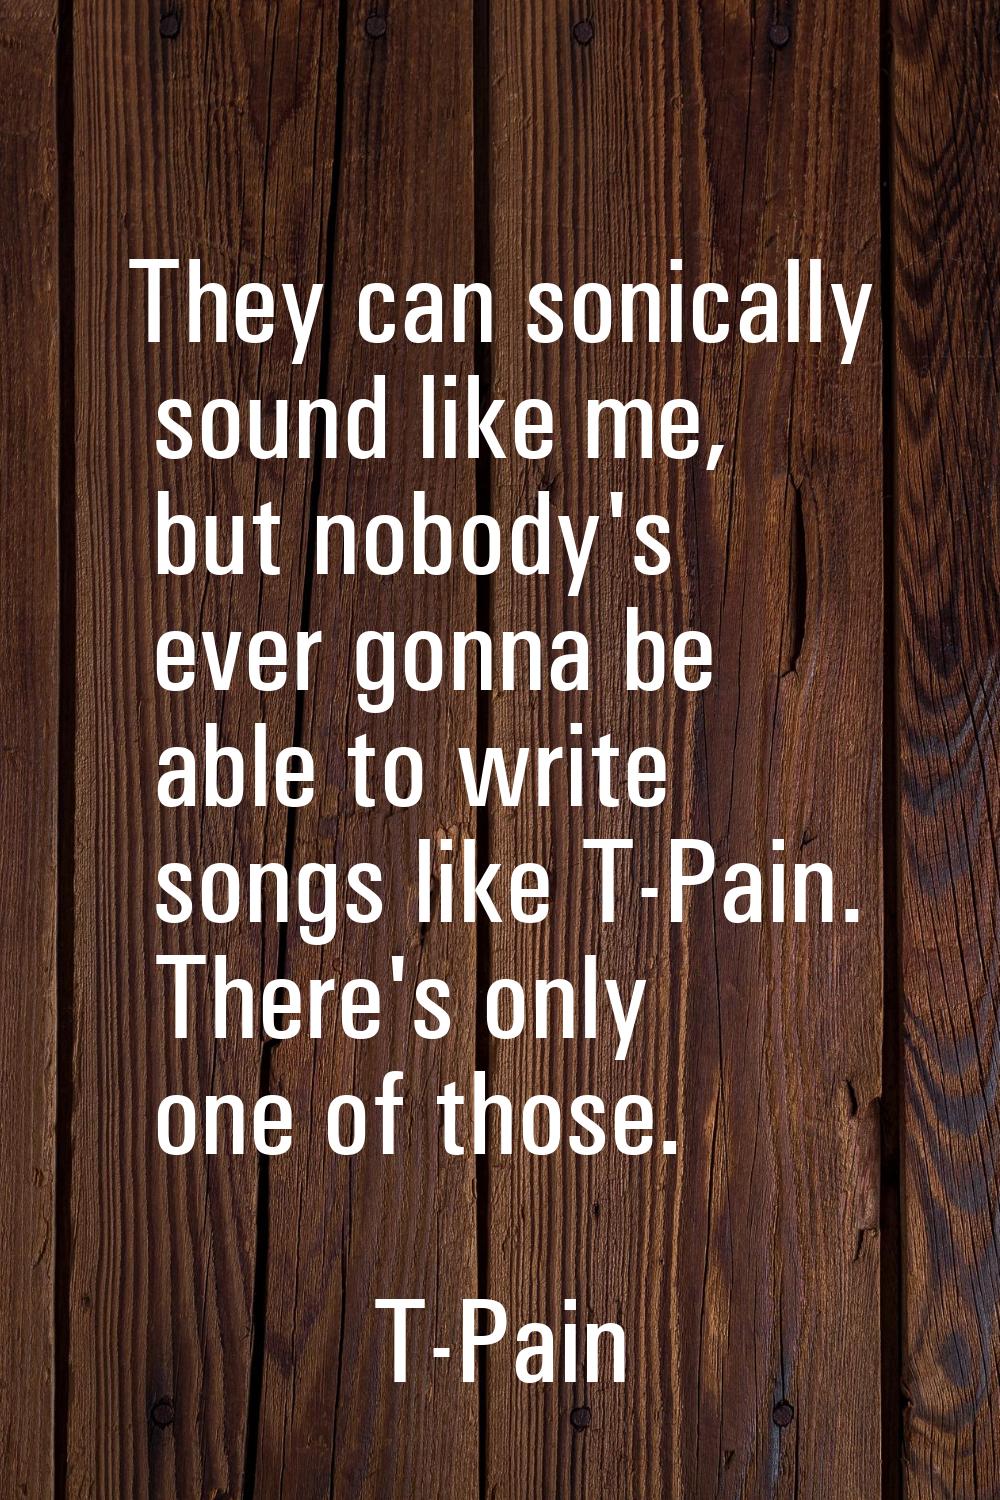 They can sonically sound like me, but nobody's ever gonna be able to write songs like T-Pain. There